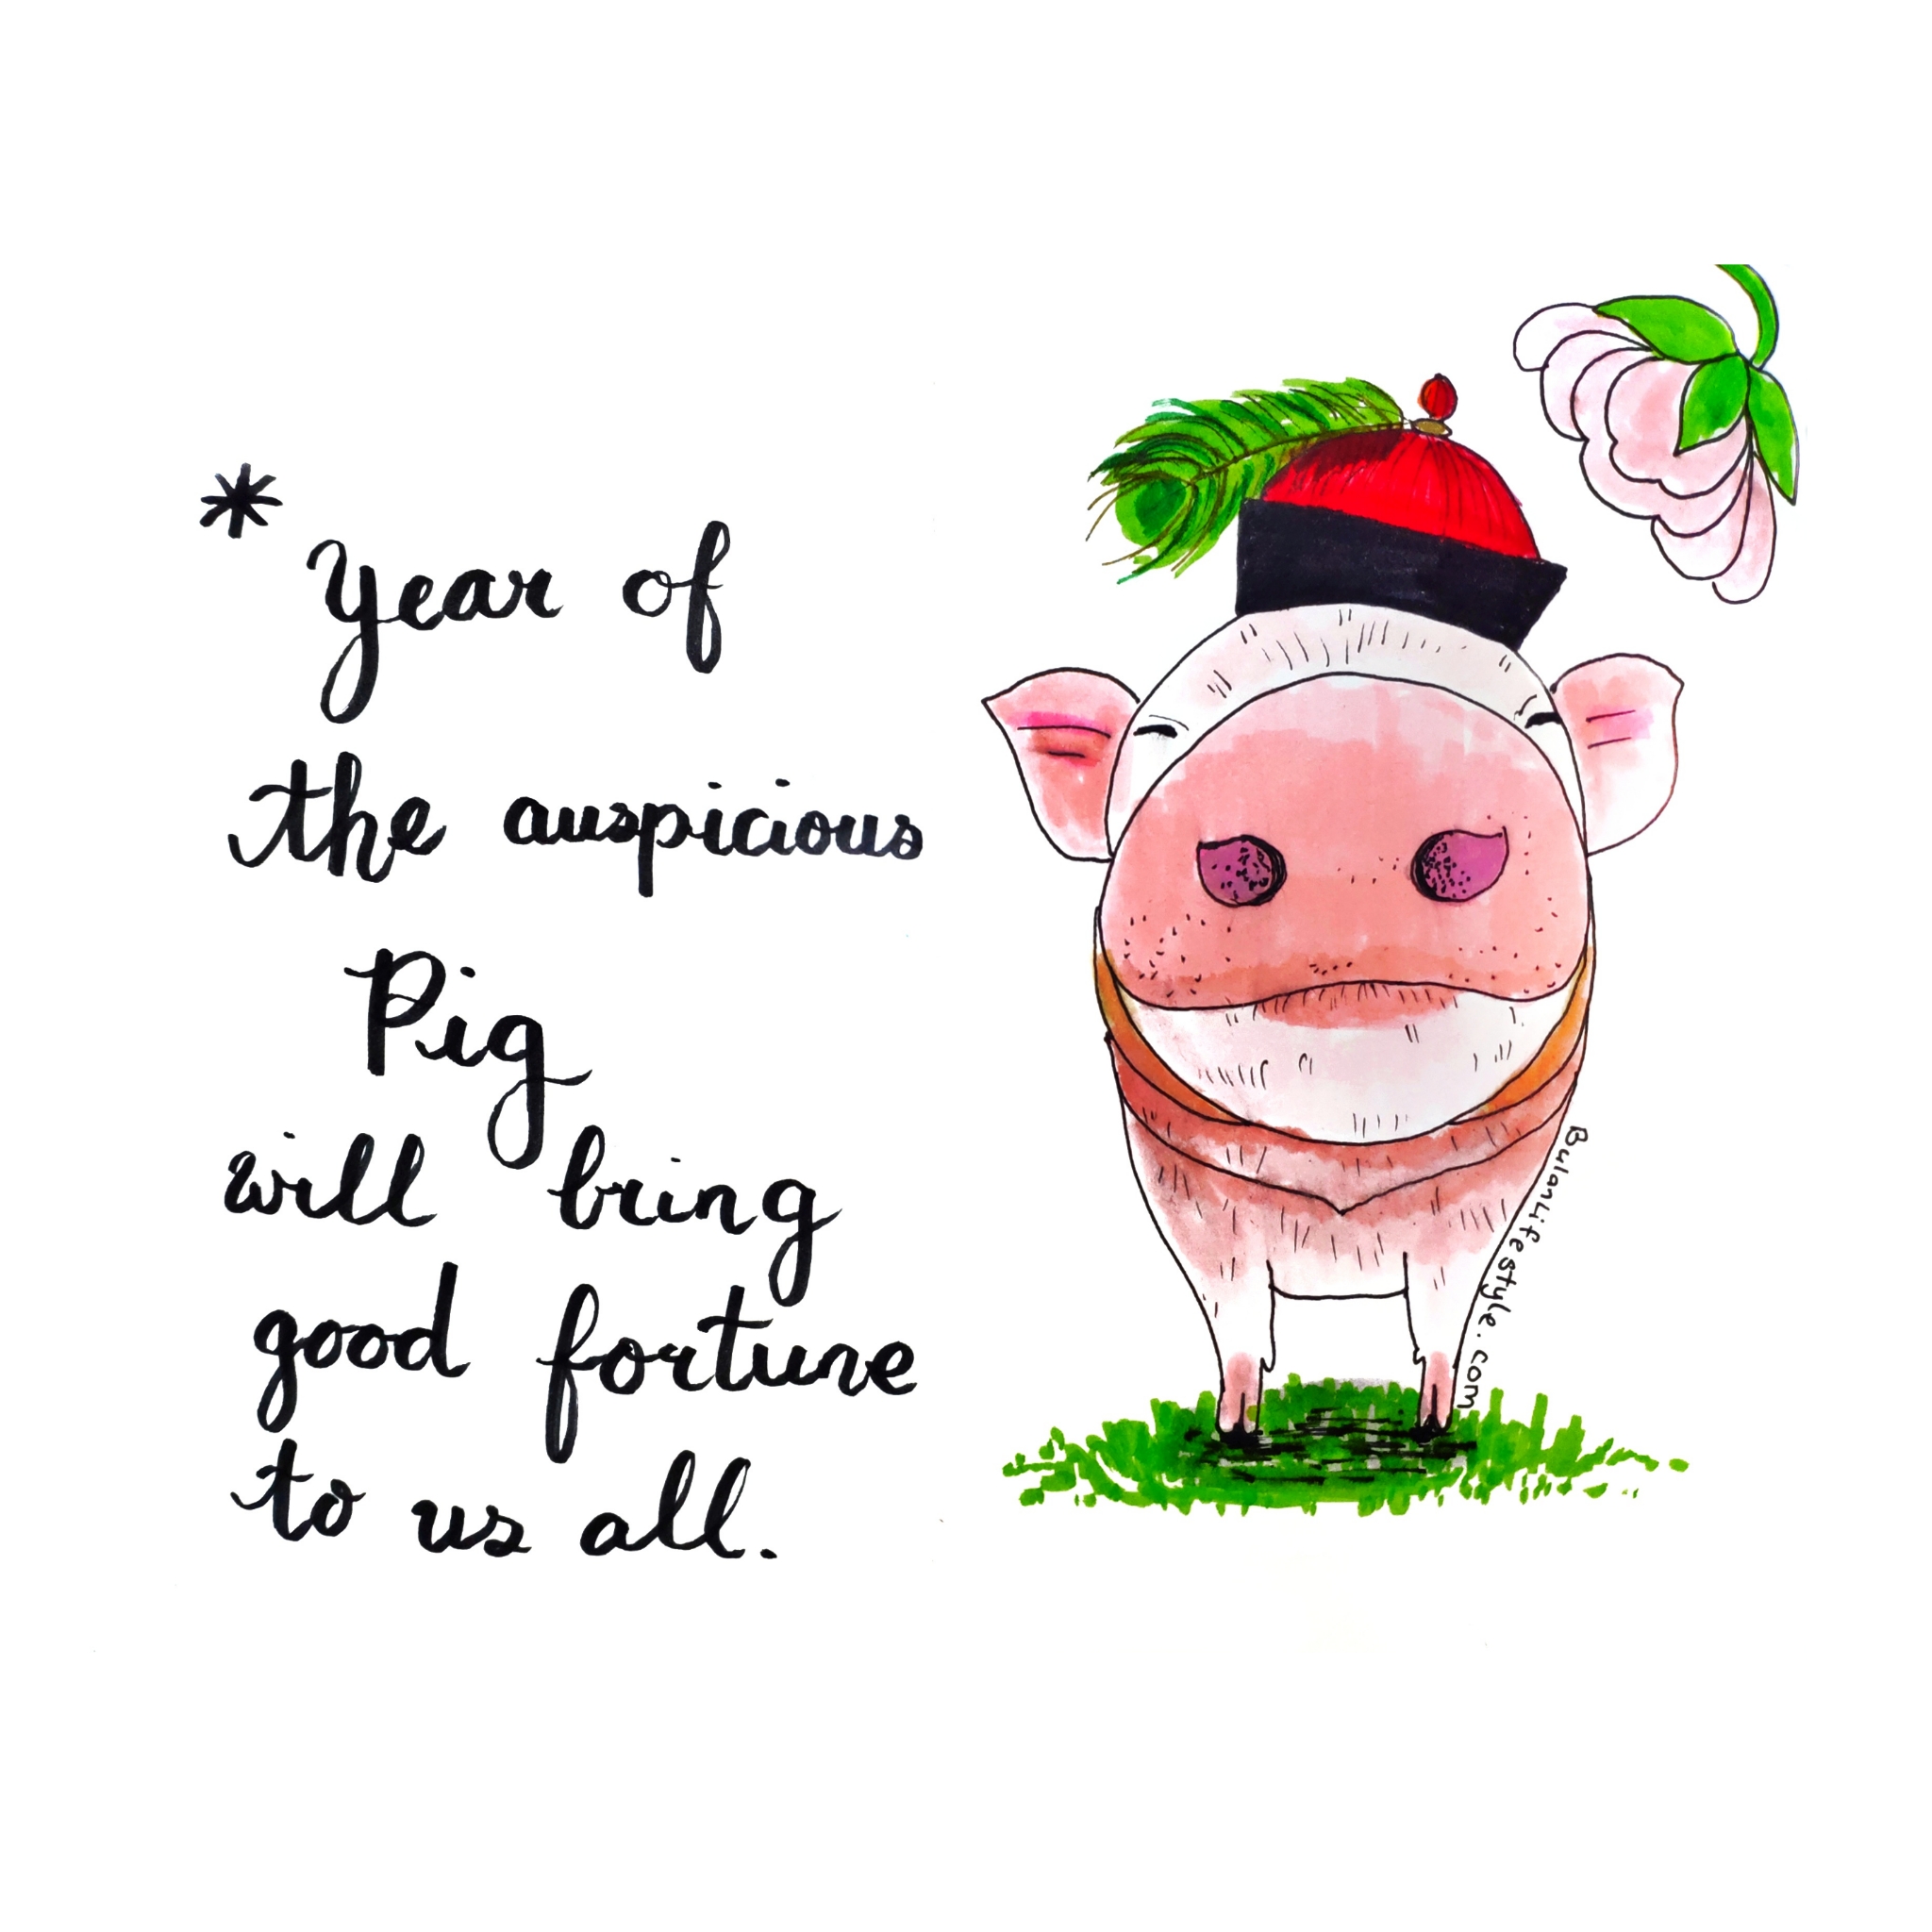 Year of the auspicious pig will bring good fortune to us all.